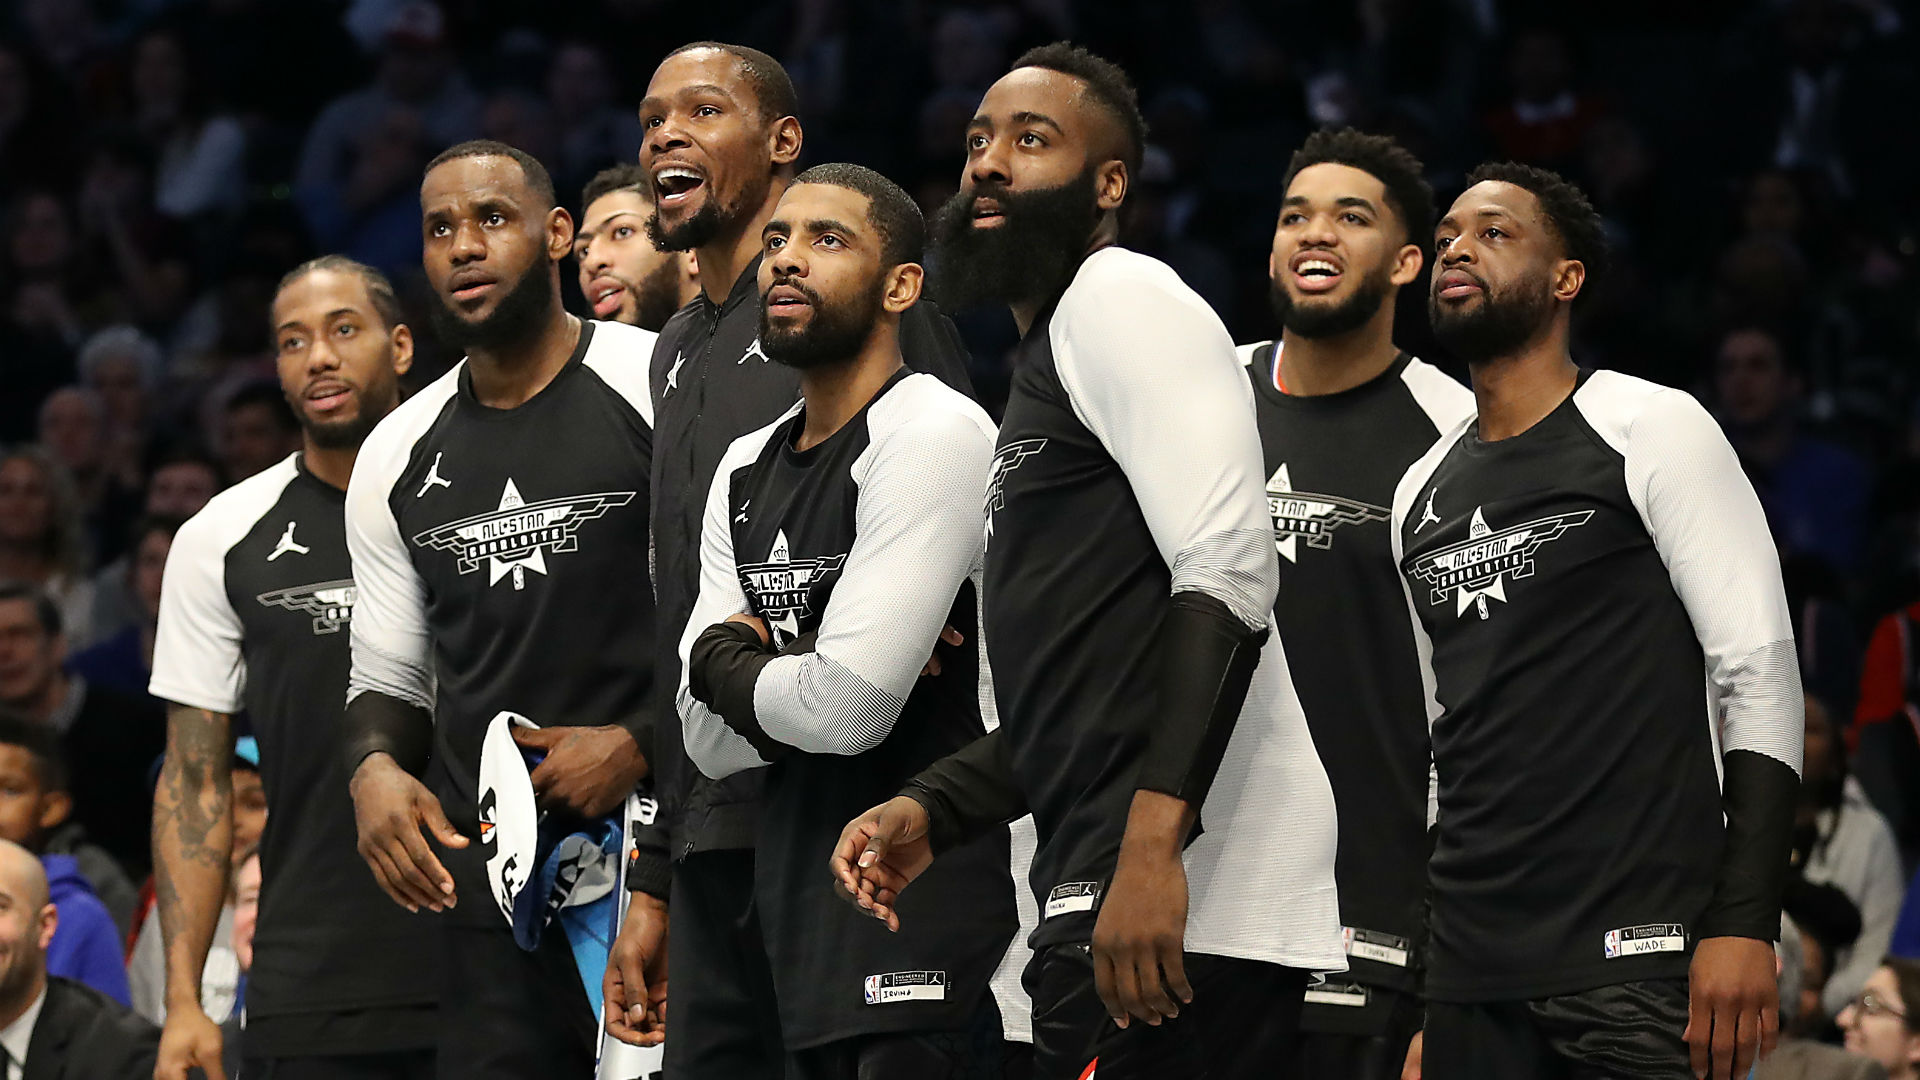 Giannis Antetokounmpo showed off his talent, but his side lost to Team LeBron in the NBA All-Star Game.